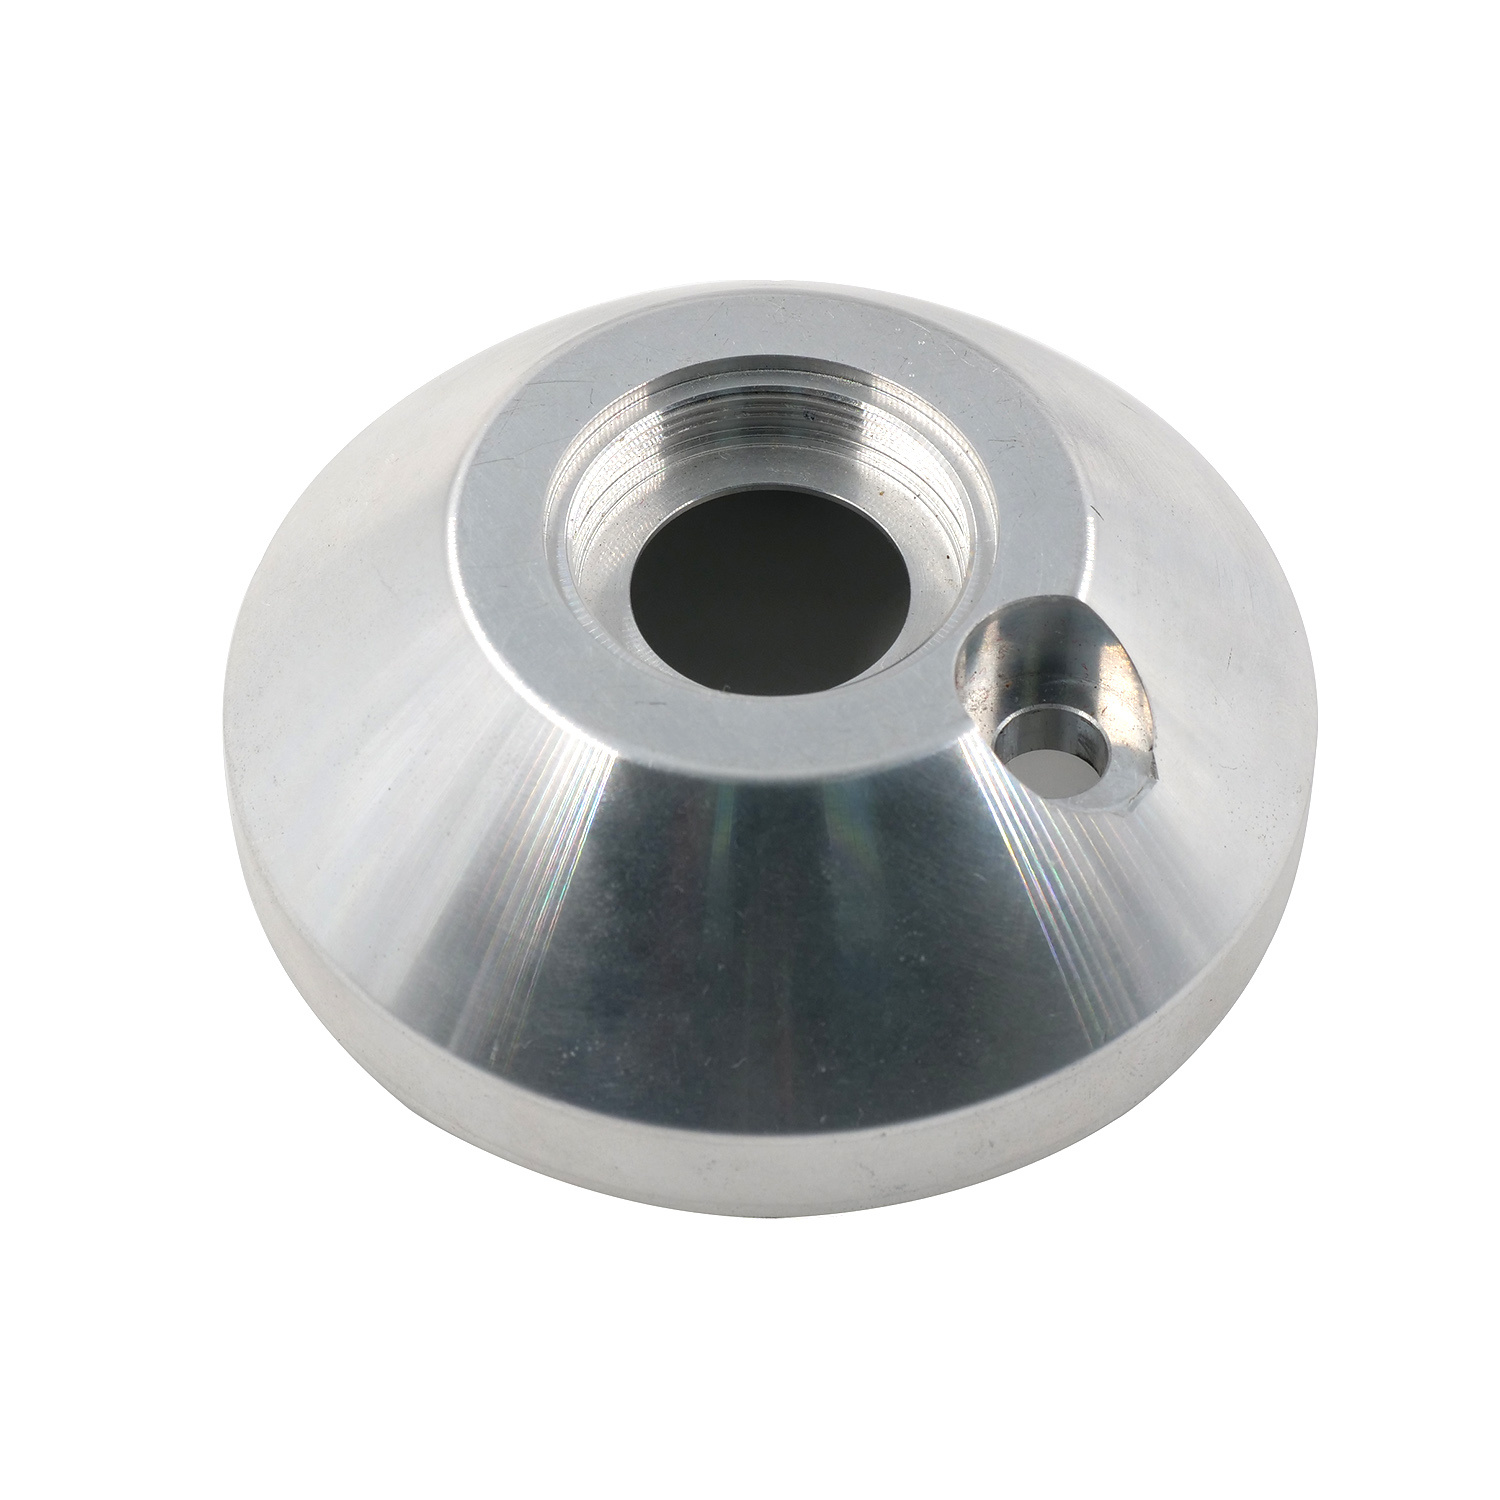 Wholesale Fastener CNC Lathe Machining Milling Service Customized Wheel Nuts Caps Hub Spacer